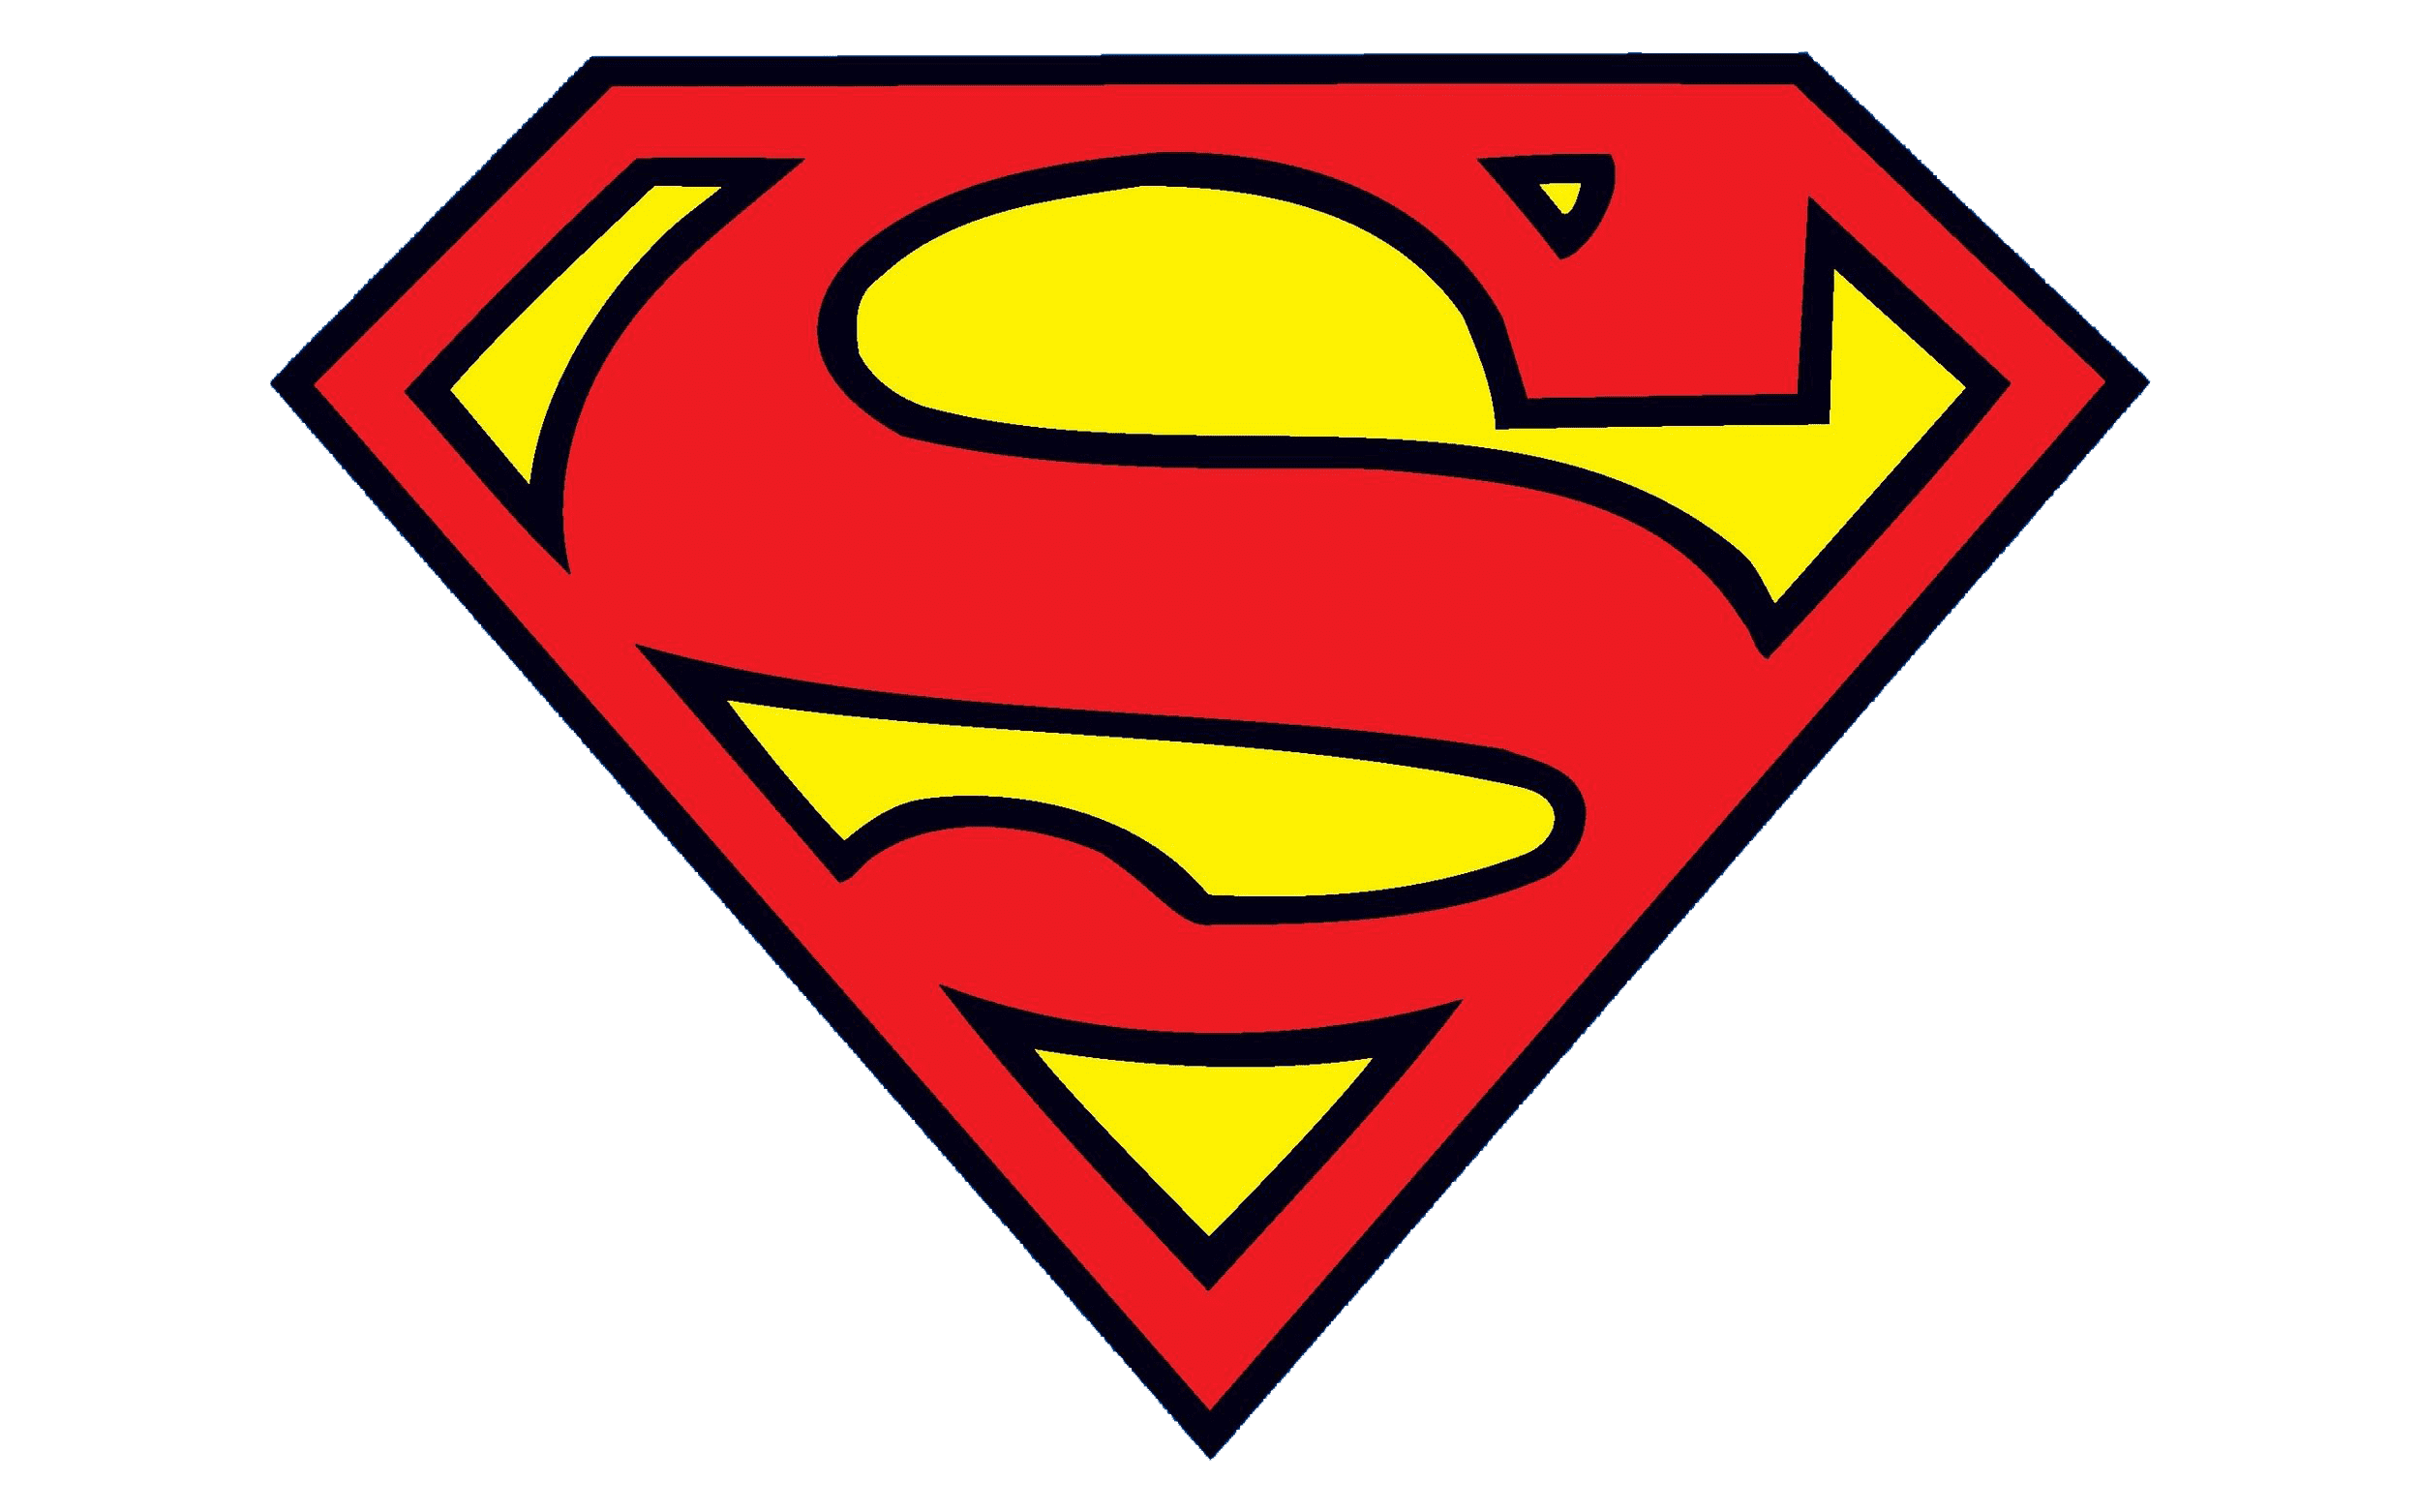 Supergirl logo and symbol, meaning, history, PNG